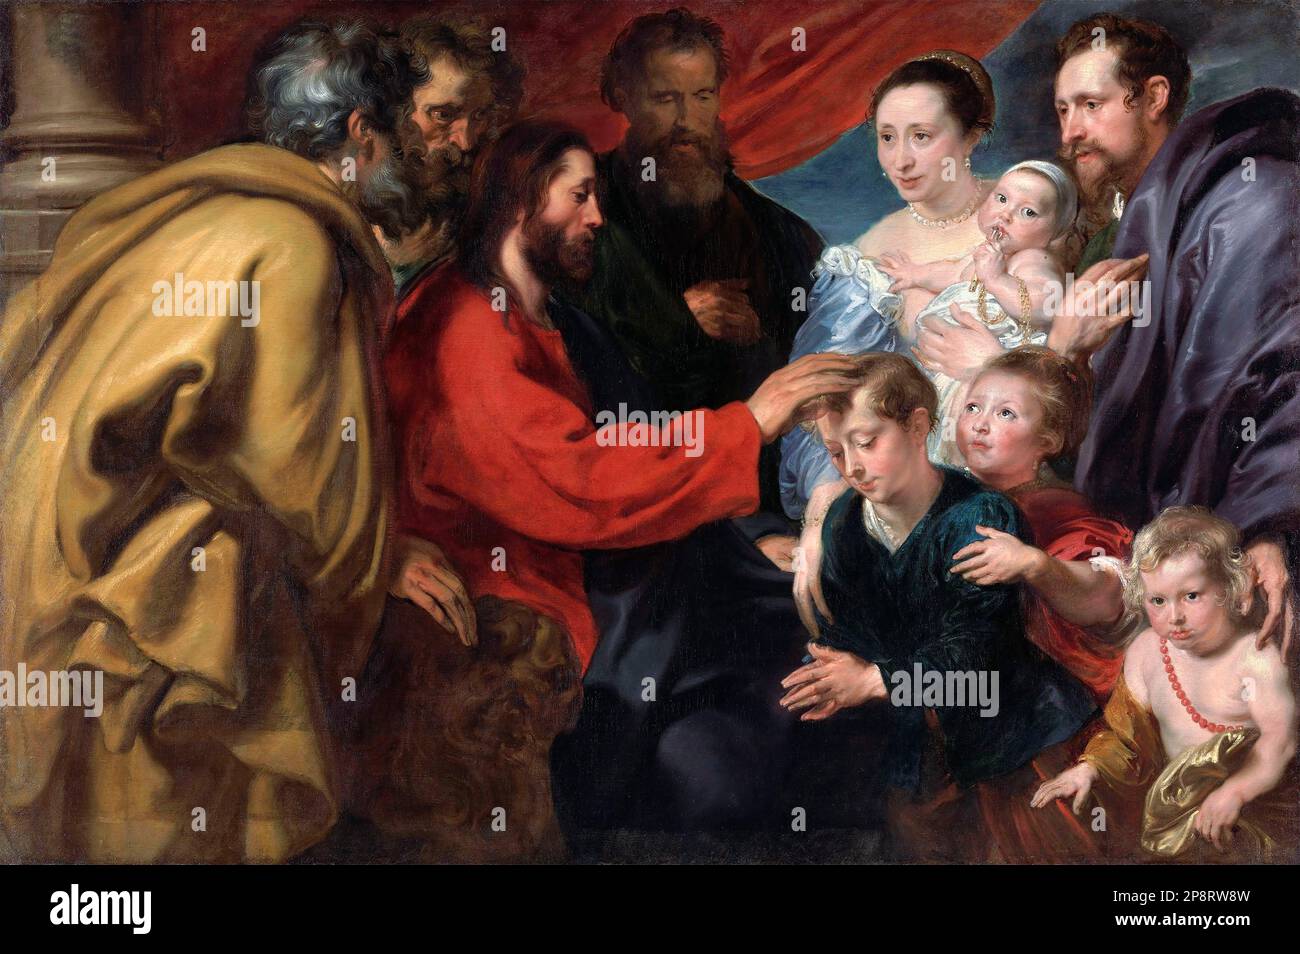 Let the Children come to me by Sir Anthony van Dyck (1599-1641), Oil on Canvas, c. 1618-20 Stockfoto